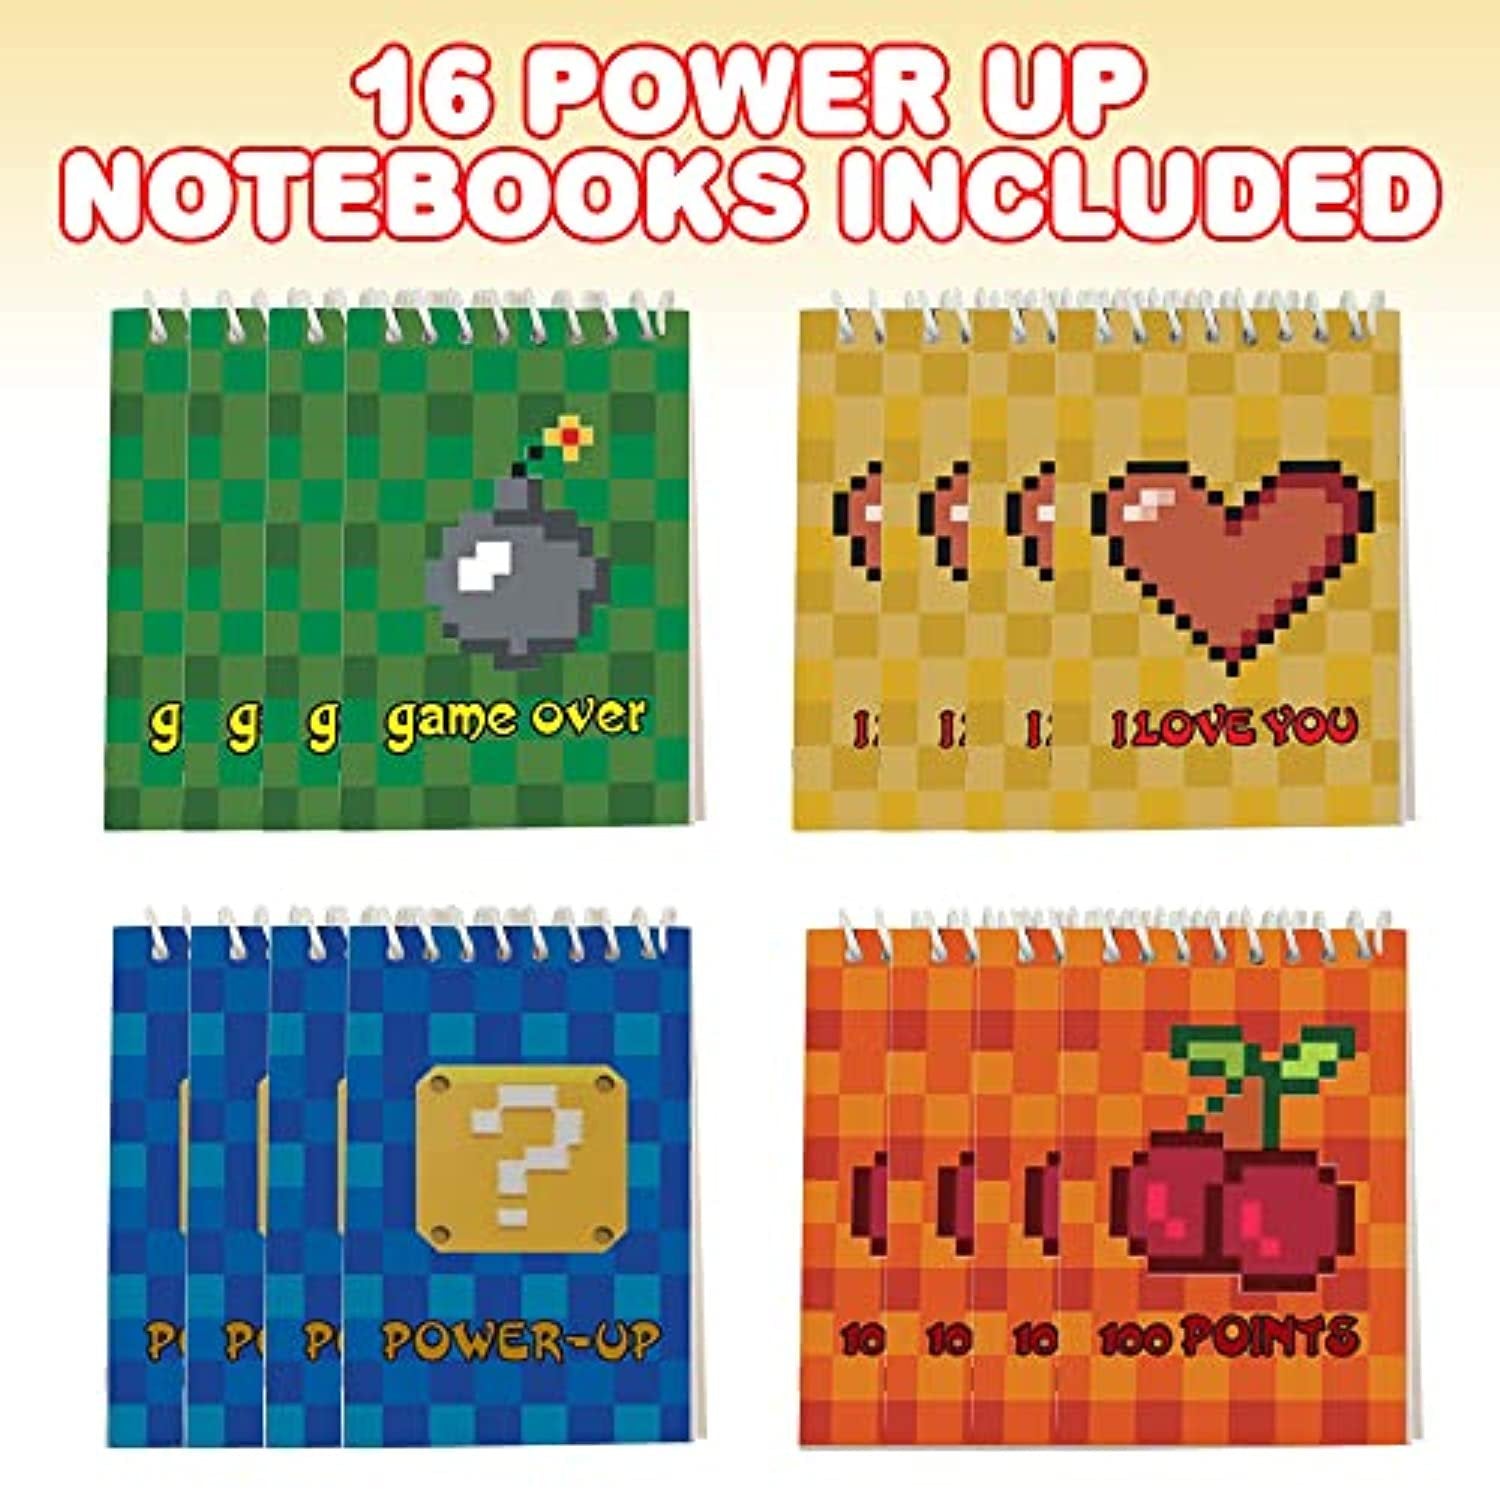 Mini Power Up Notebooks, Pack of 16, Video Game & Pixel Themed Spiral Notepads, Cute Stationery Supplies for School and Office, Fun Birthday Party Favors, Goodie Bag Fillers for Kids